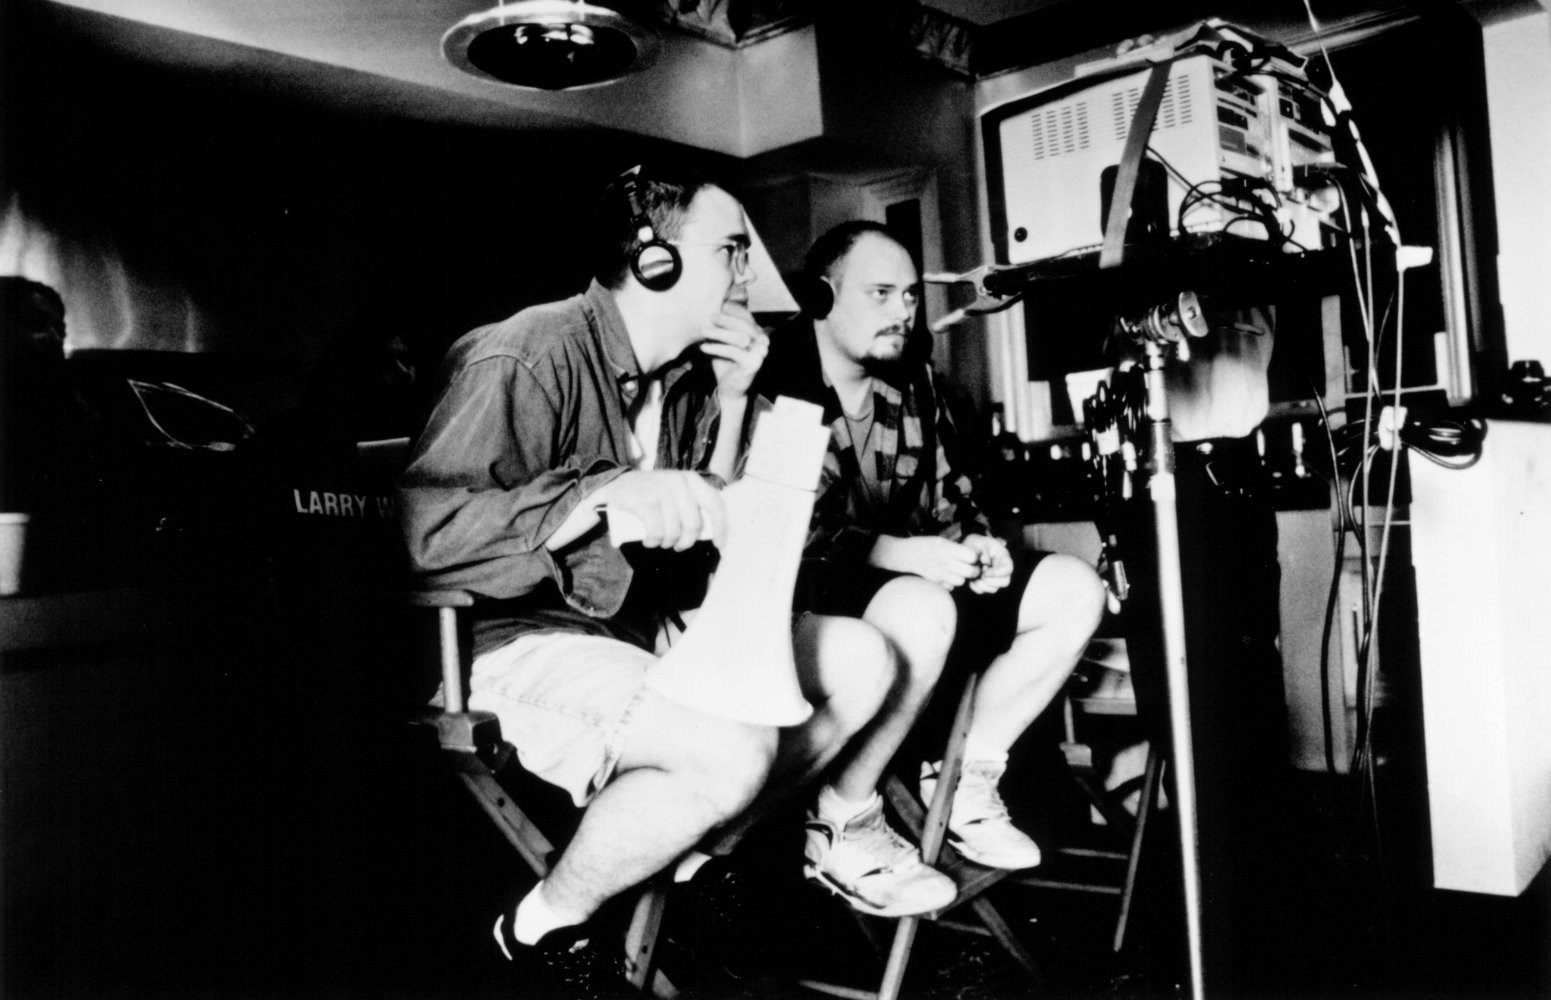 Two Directors on Set Behind the Scenes